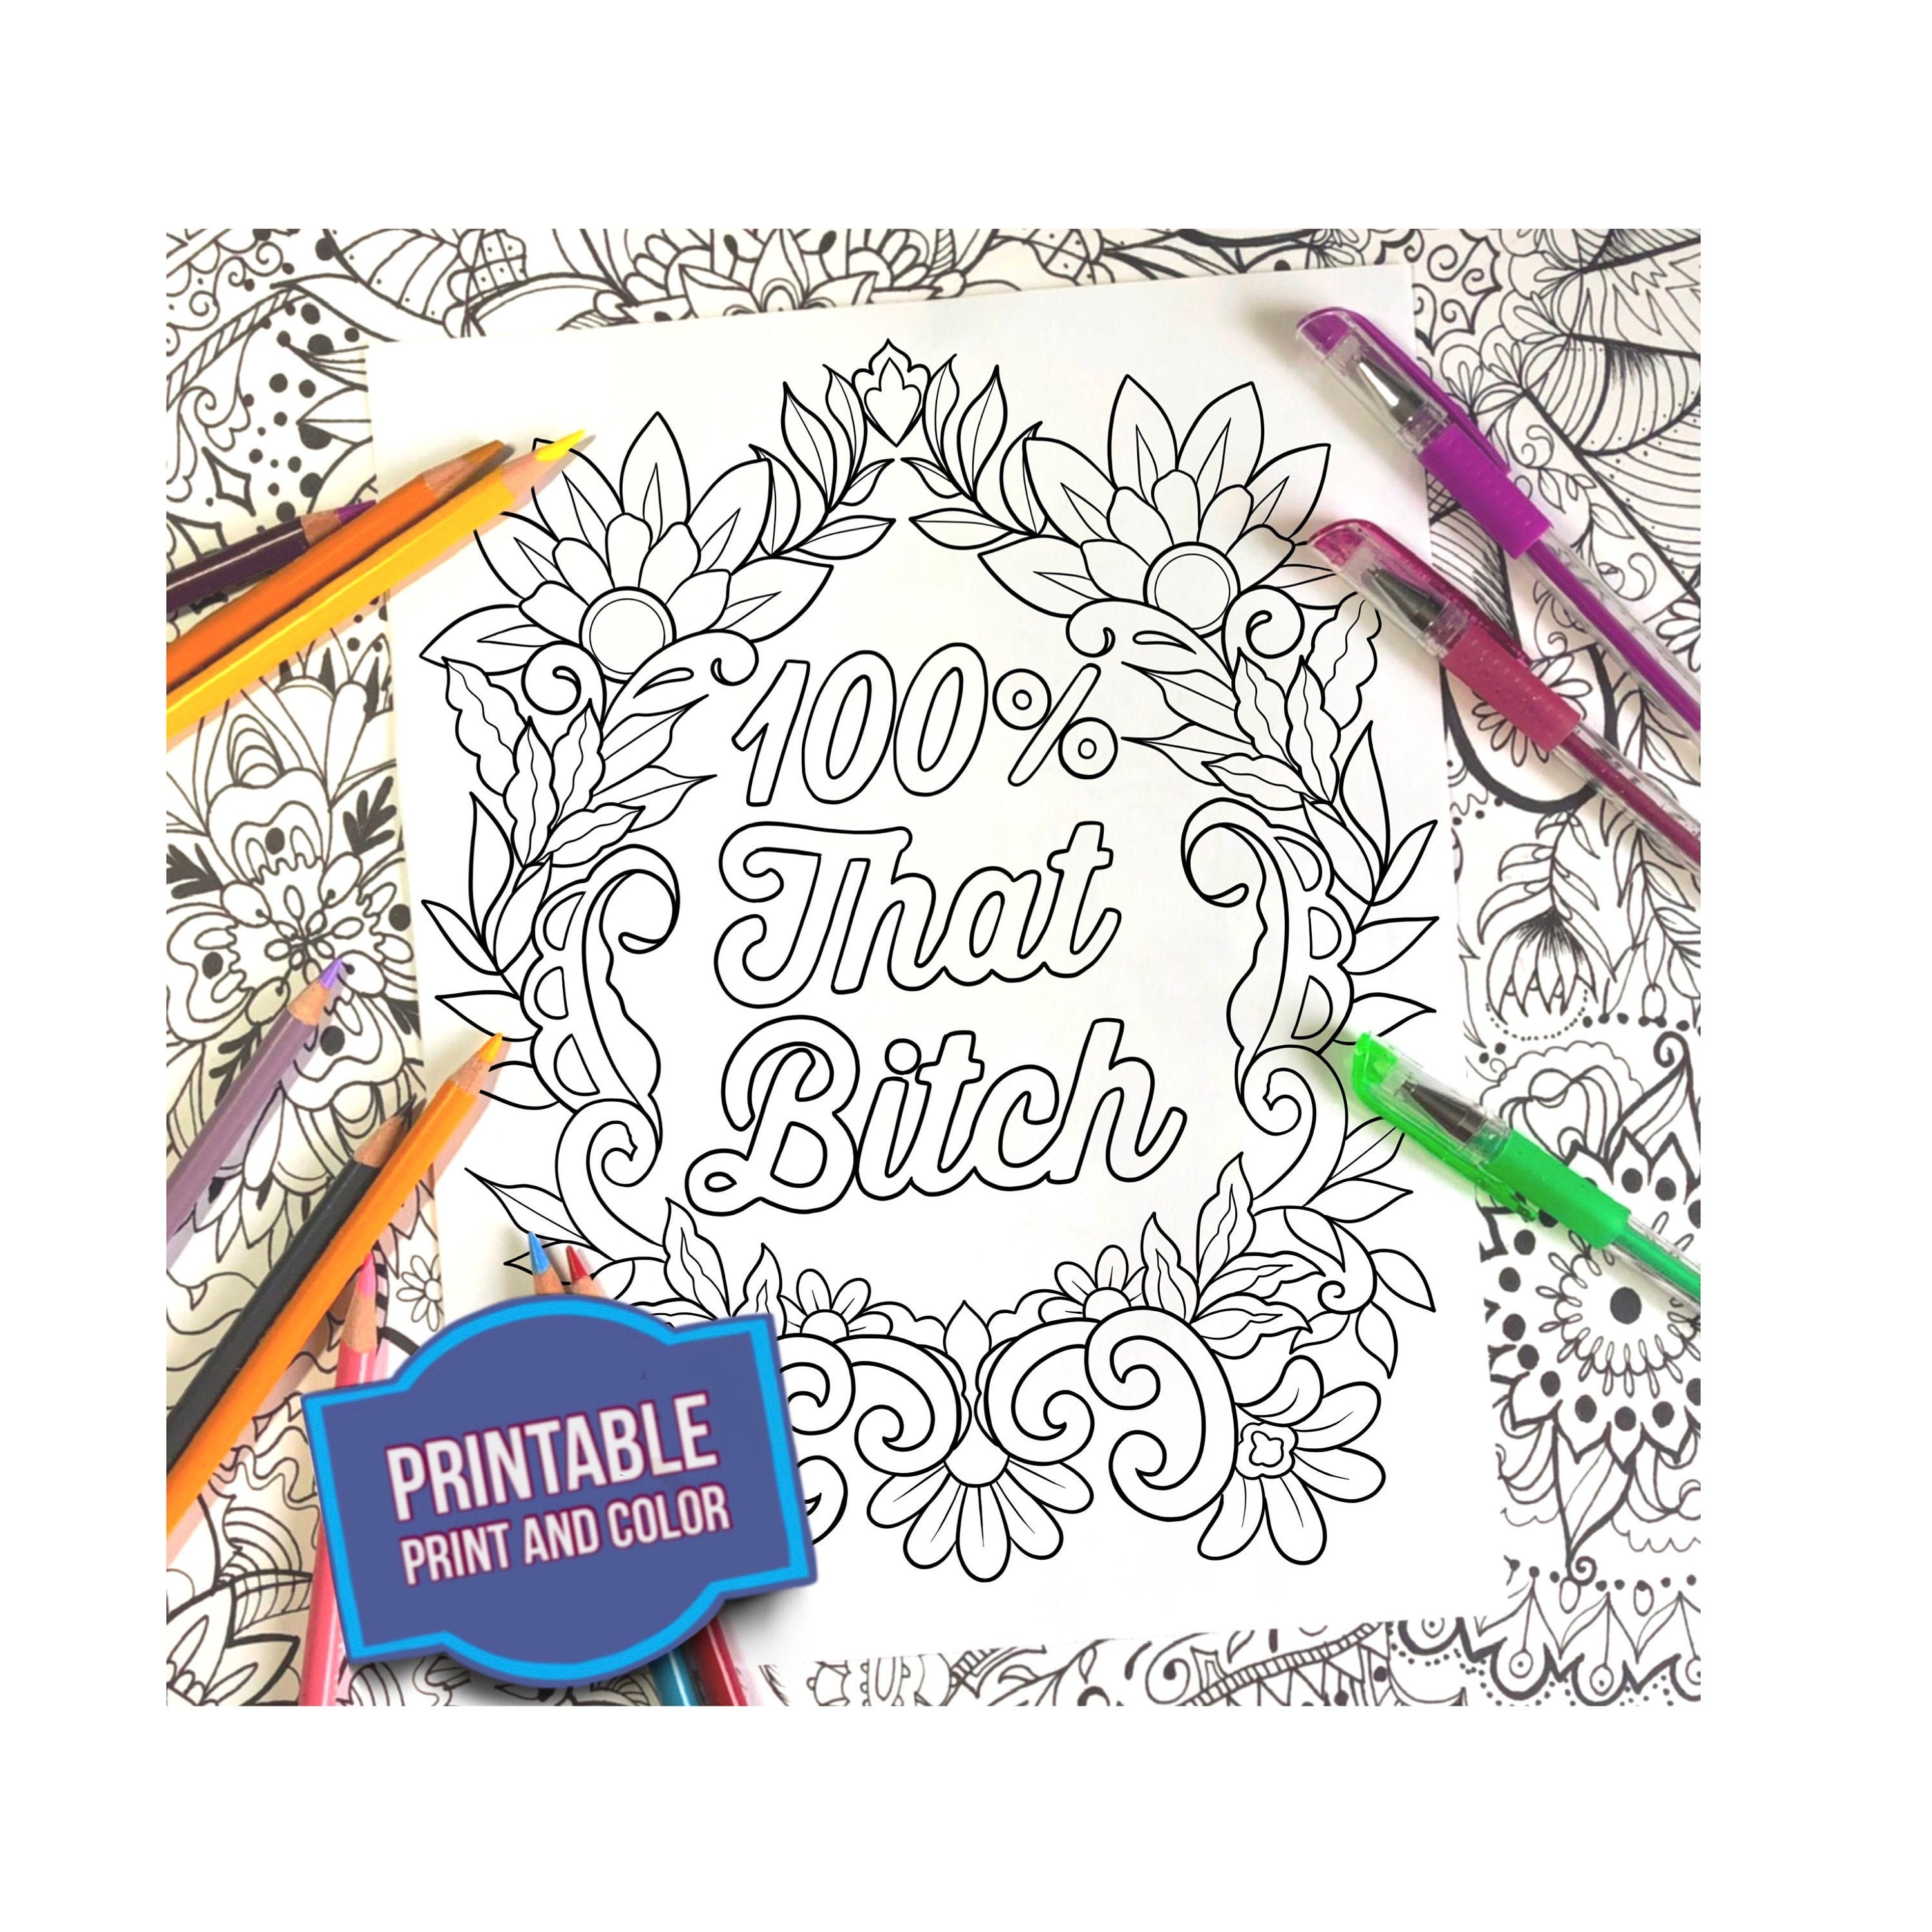 Adult Coloring Books: Creative and Subversive?